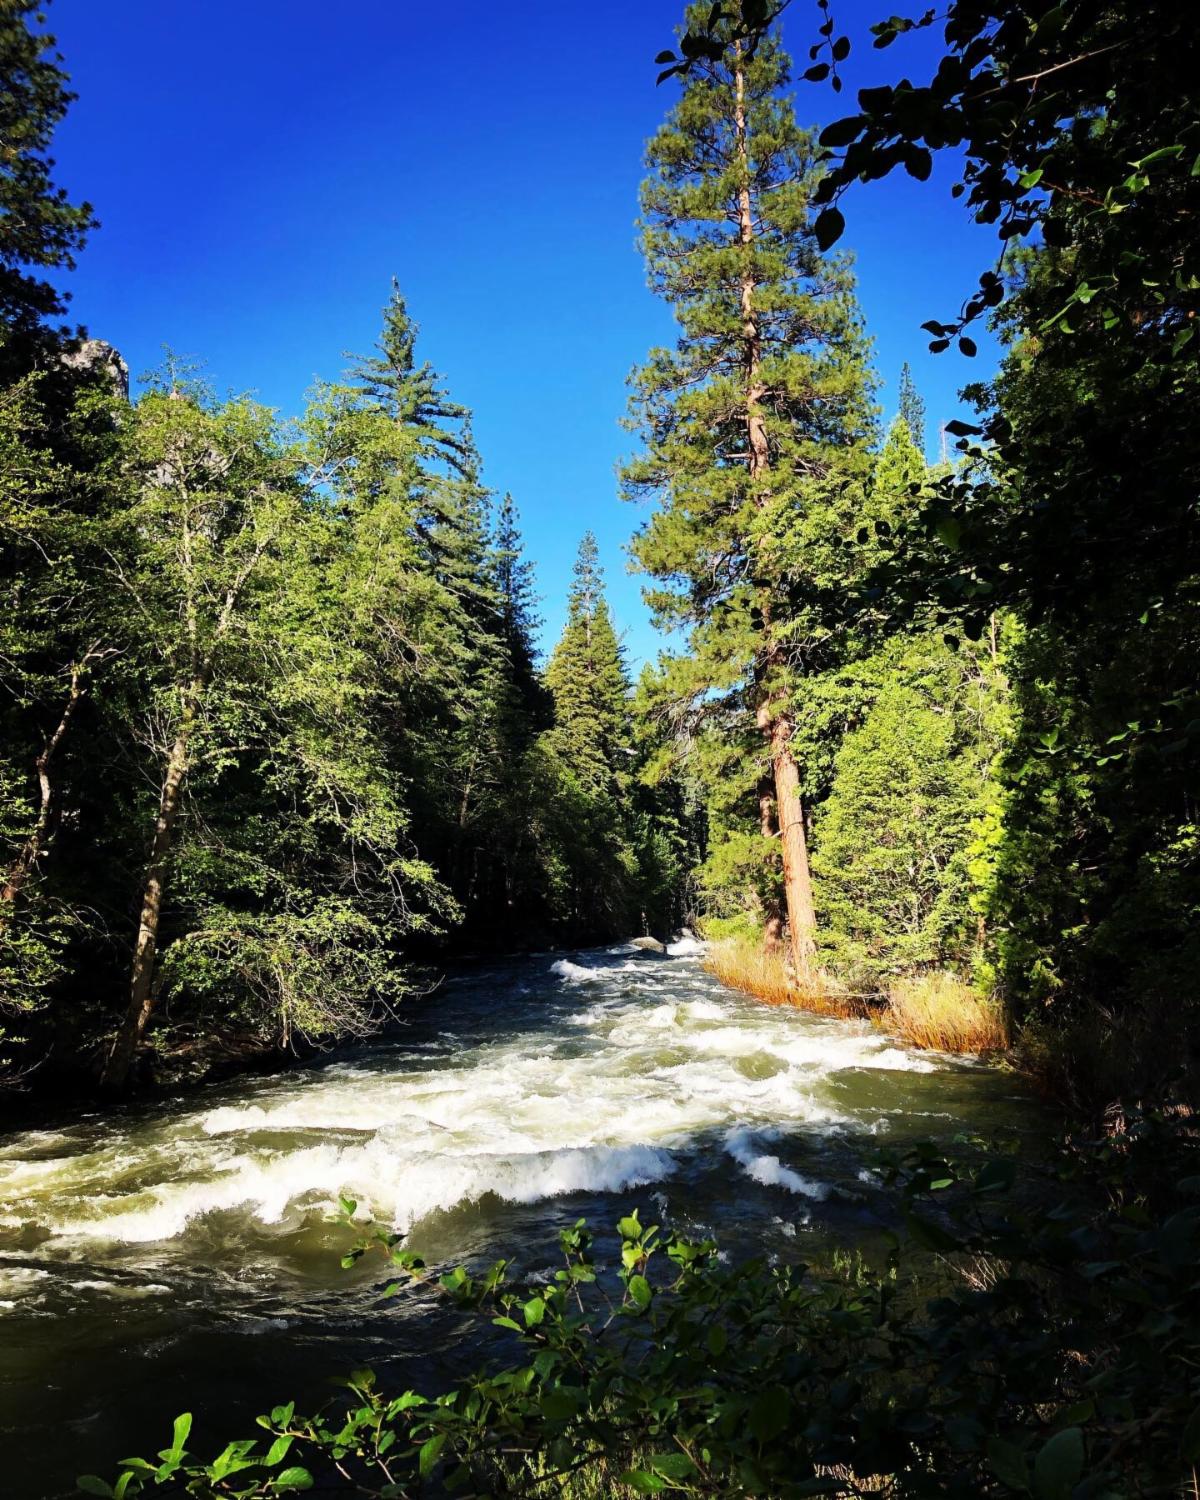 White rapids flow on the Kings River, lined with with forest of pine trees.